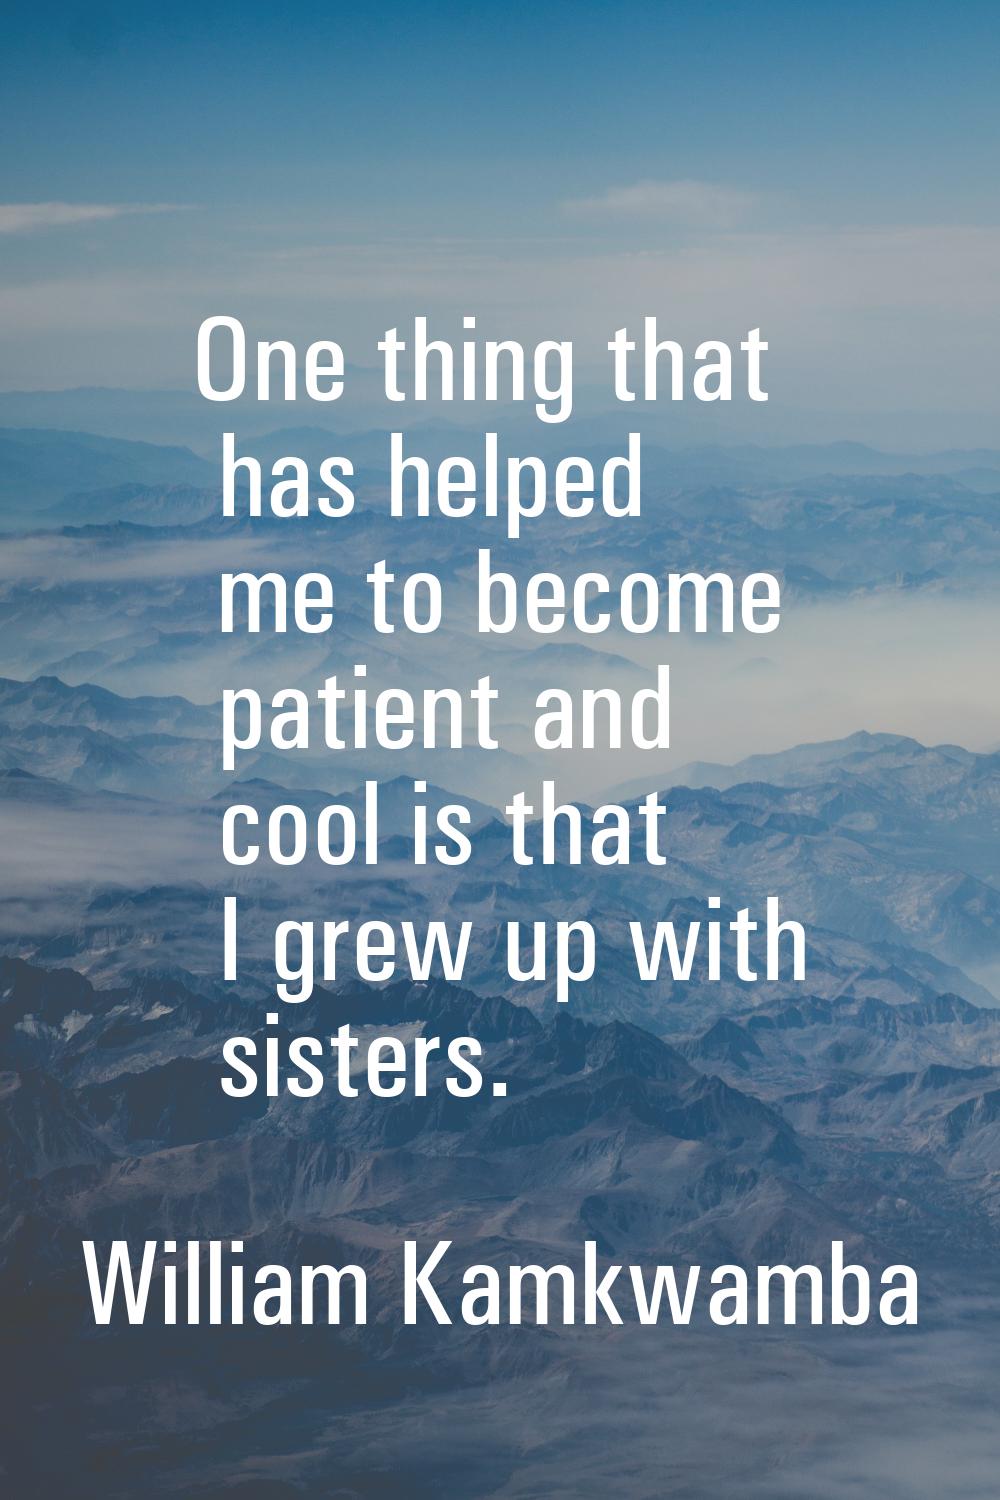 One thing that has helped me to become patient and cool is that I grew up with sisters.